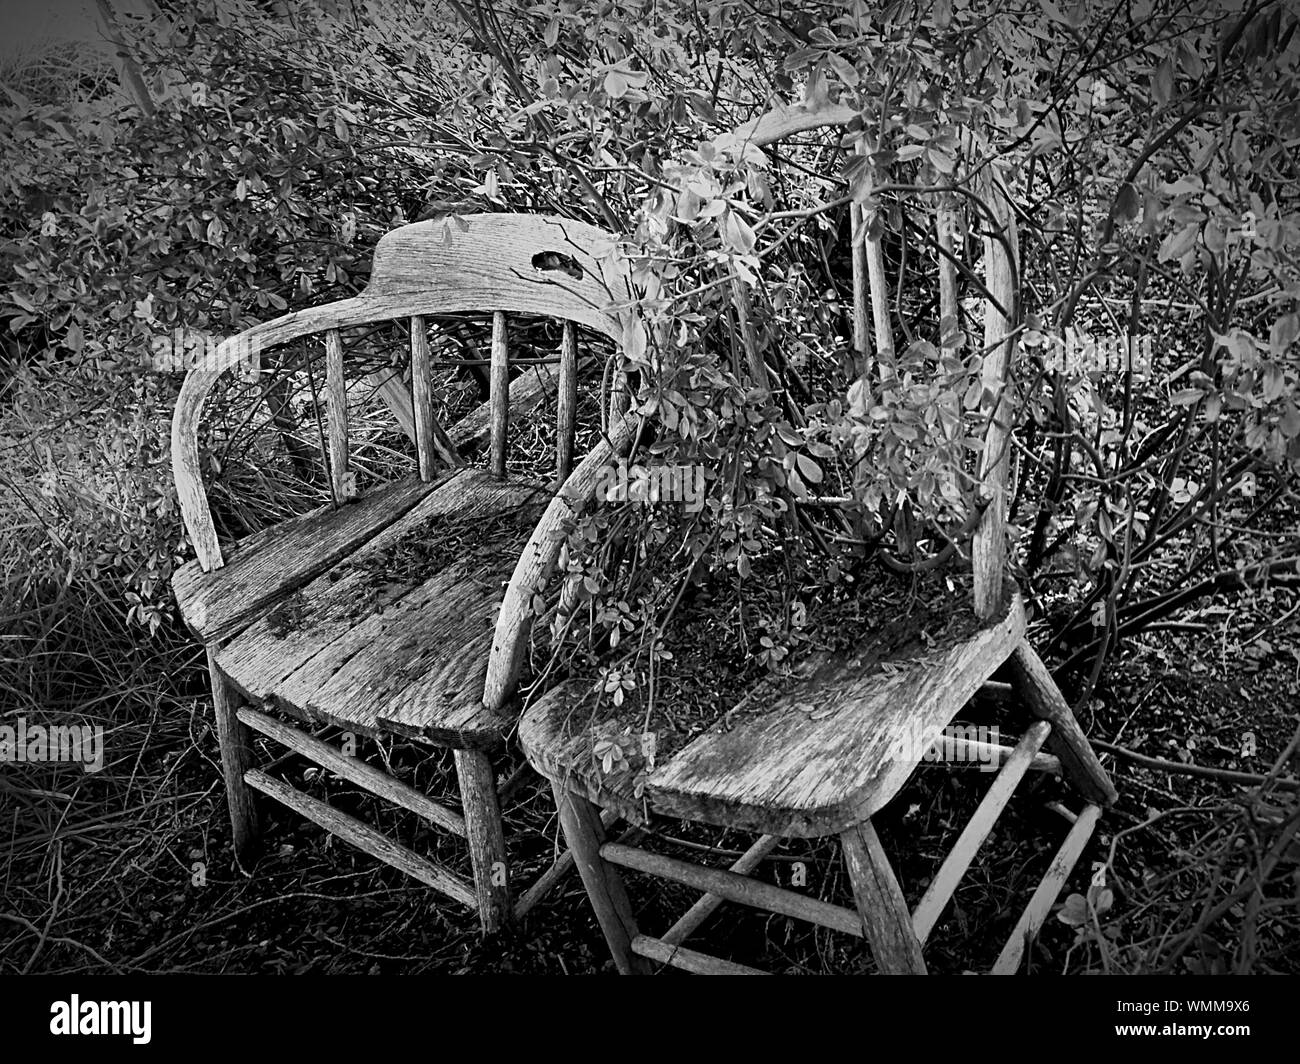 Abandoned Wooden Chairs With Overgrown Plant In Back Yard Stock Photo